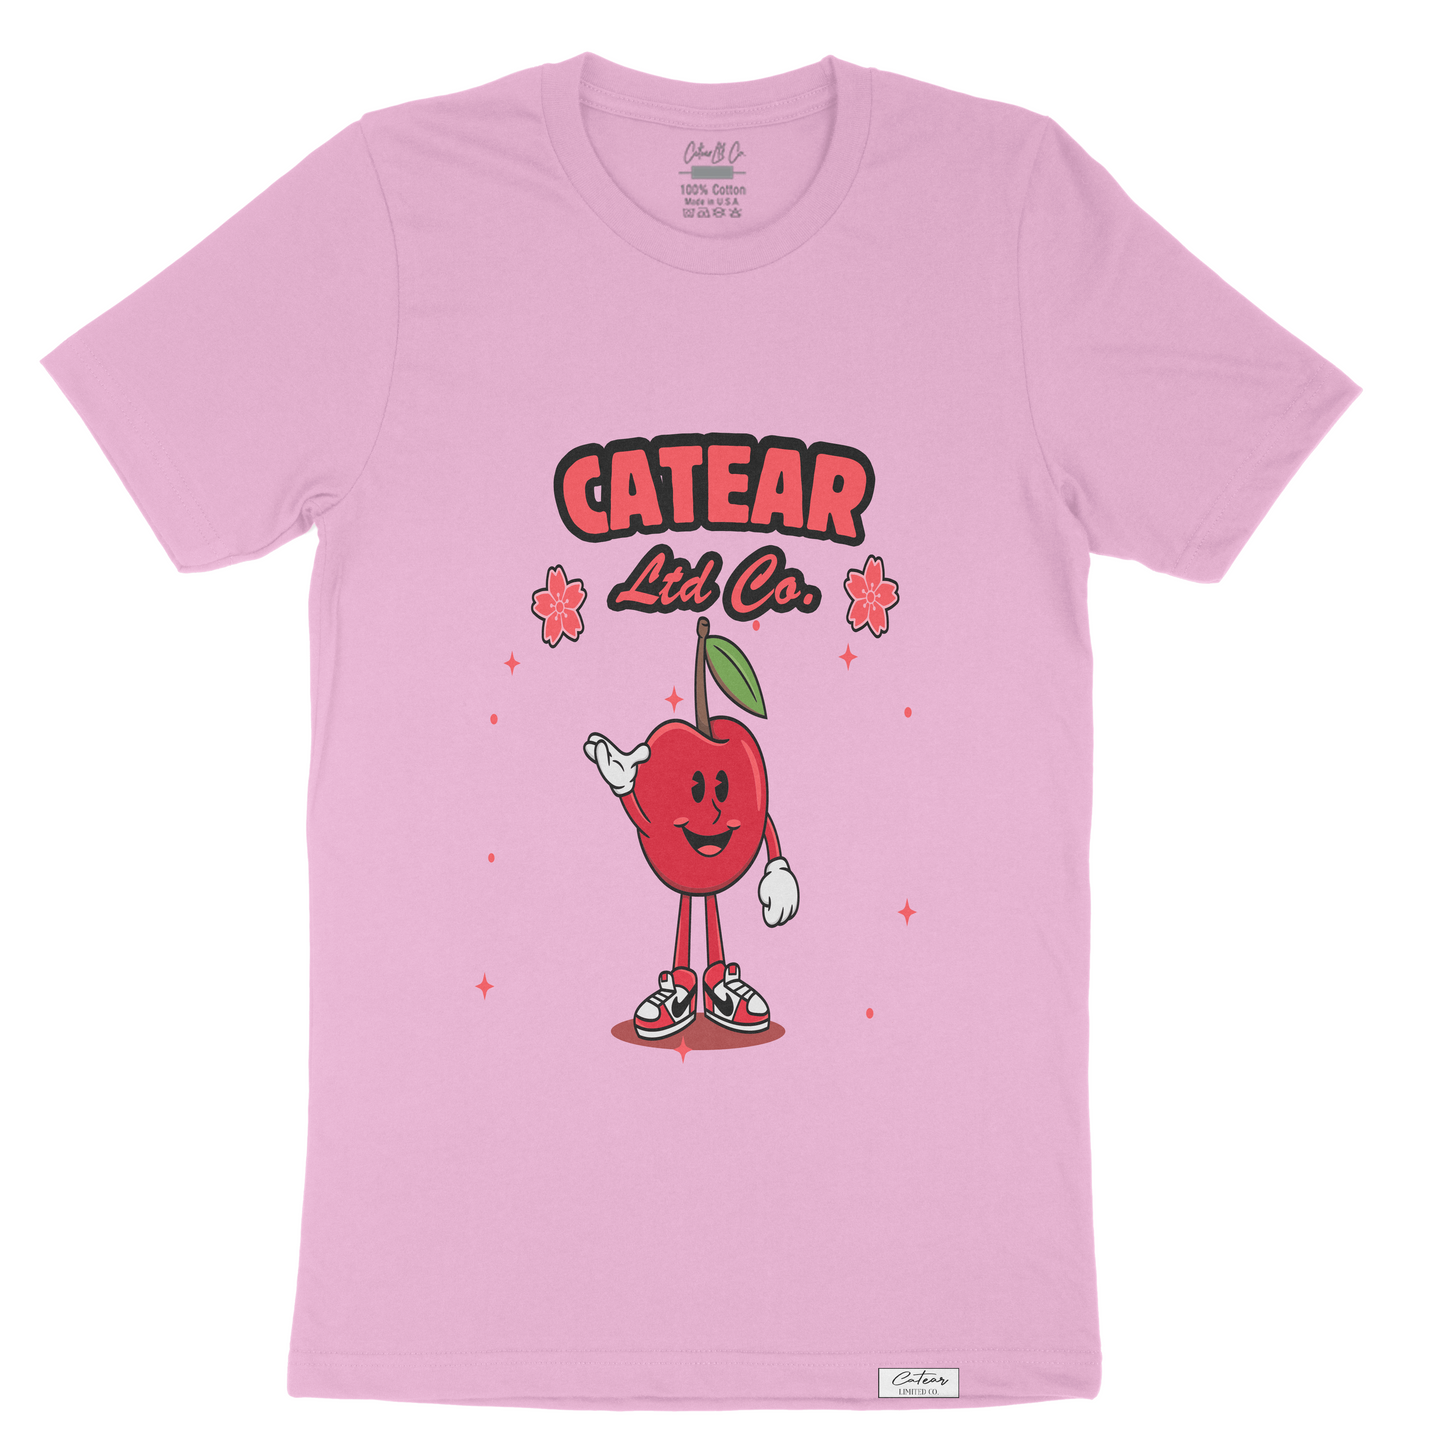 Unisex Lilac color tee with hand-drawn cherry mascot screen printed on the front, woven label on bottom left 100% Cotton. Relaxed fit & great feel.